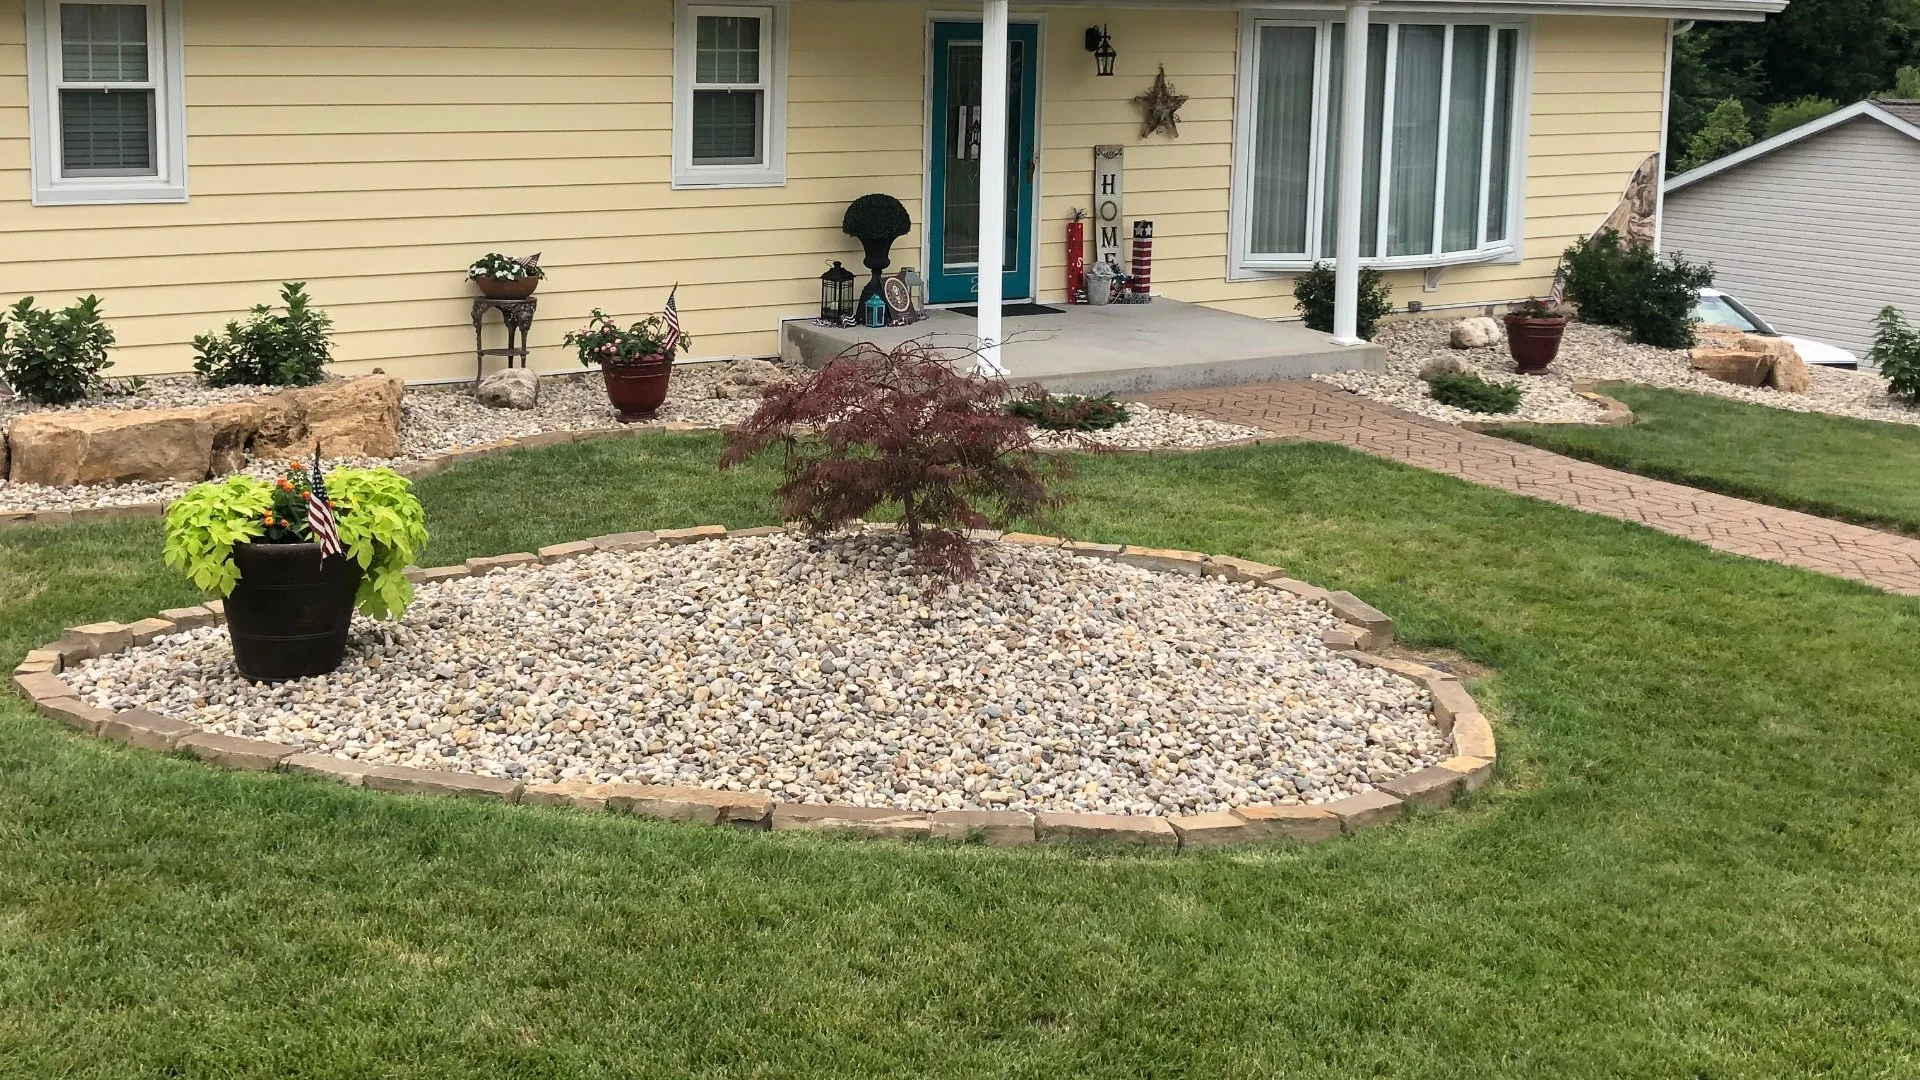 What Are Some Good Rock Options for a Ground Cover?